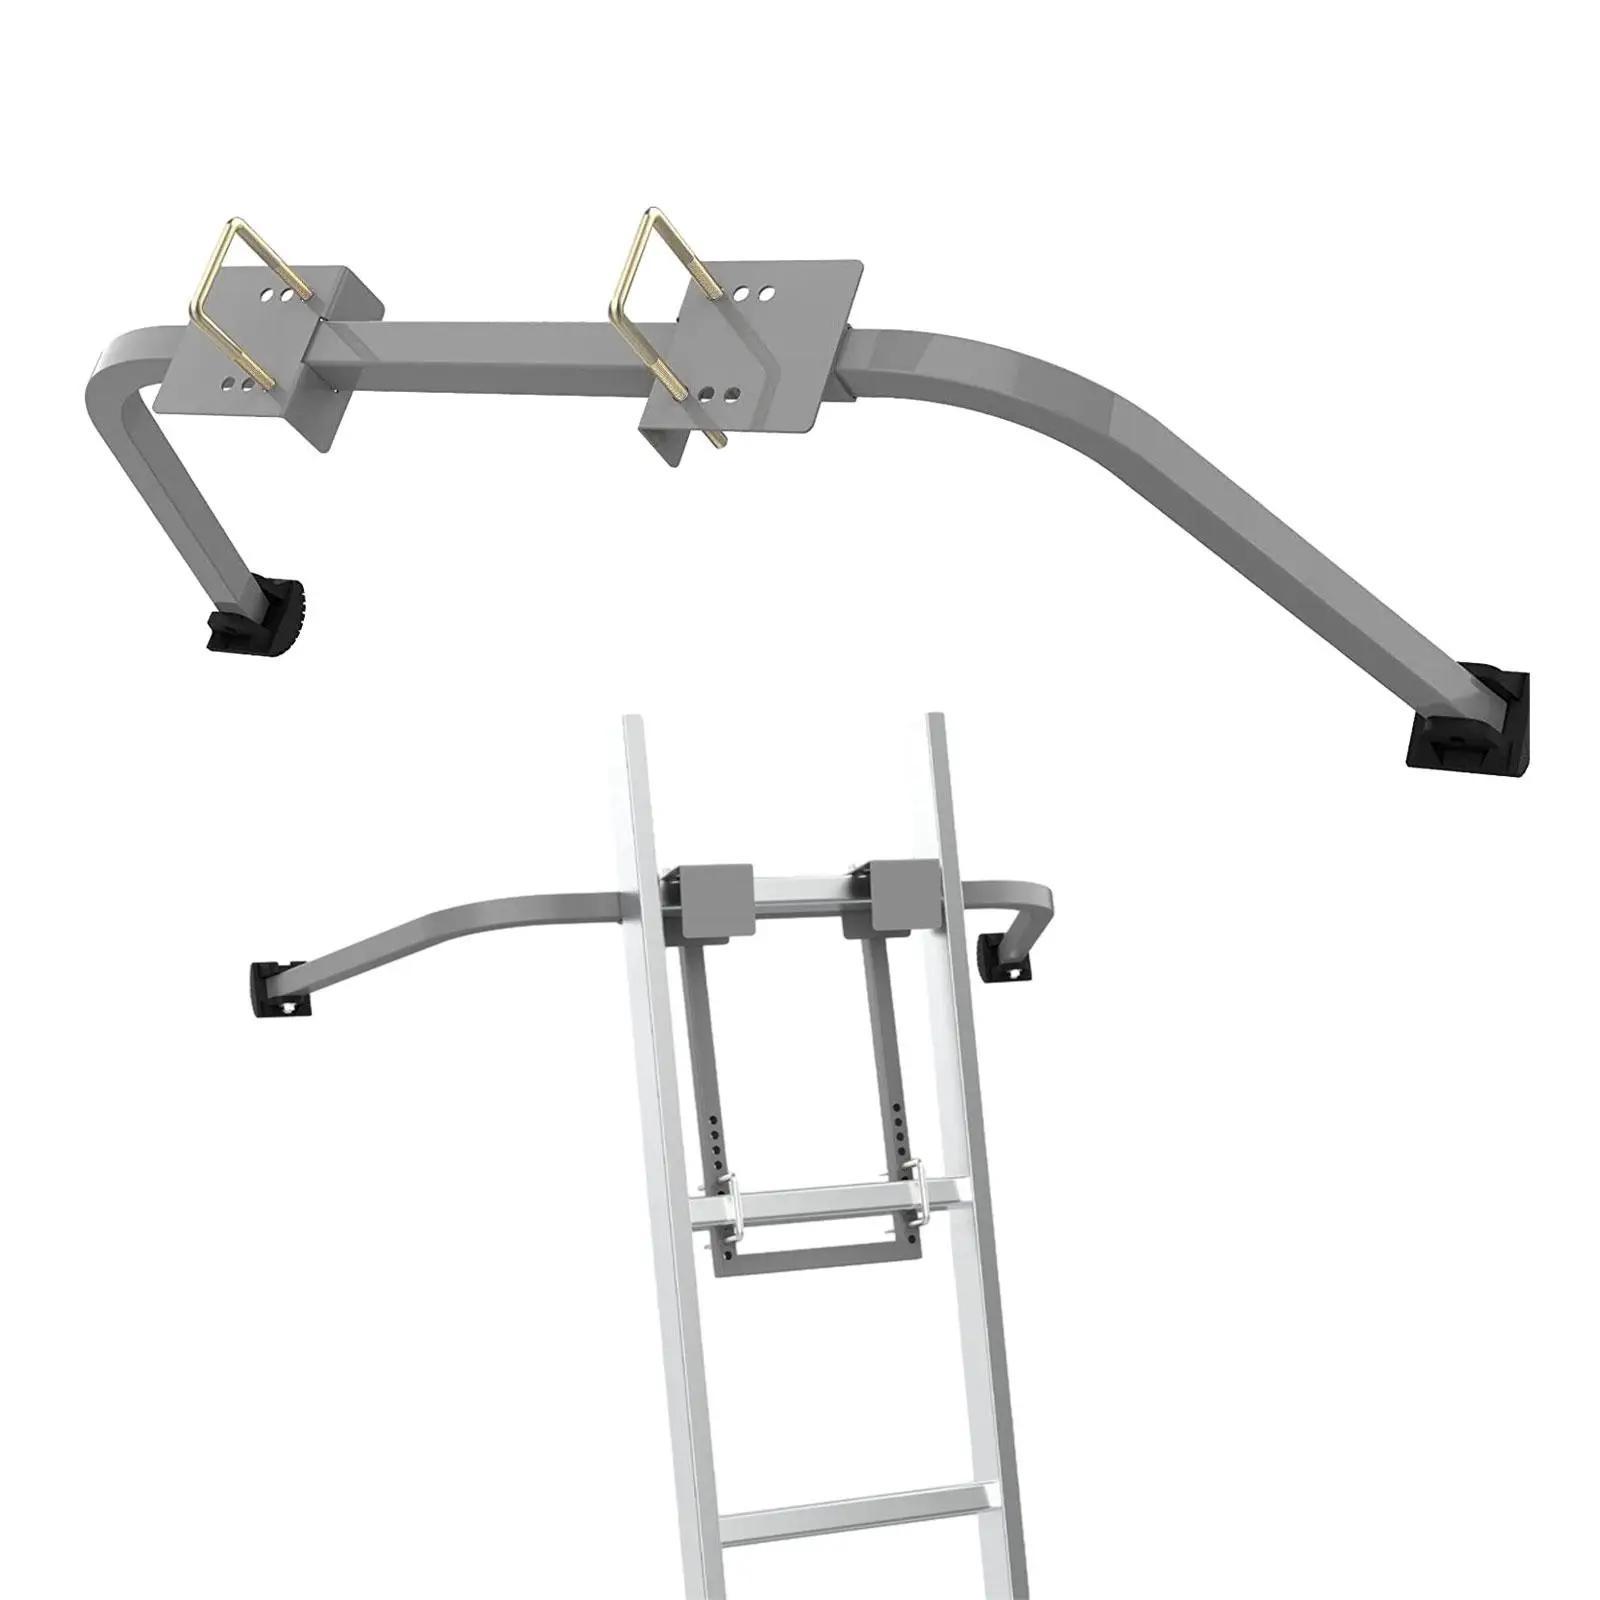 Ladder Stabilizer Accessory Ladder Spare Parts Straight Ladder Stabilizer for Wall Outdoor Repair Projects Roof Ladders Gutter